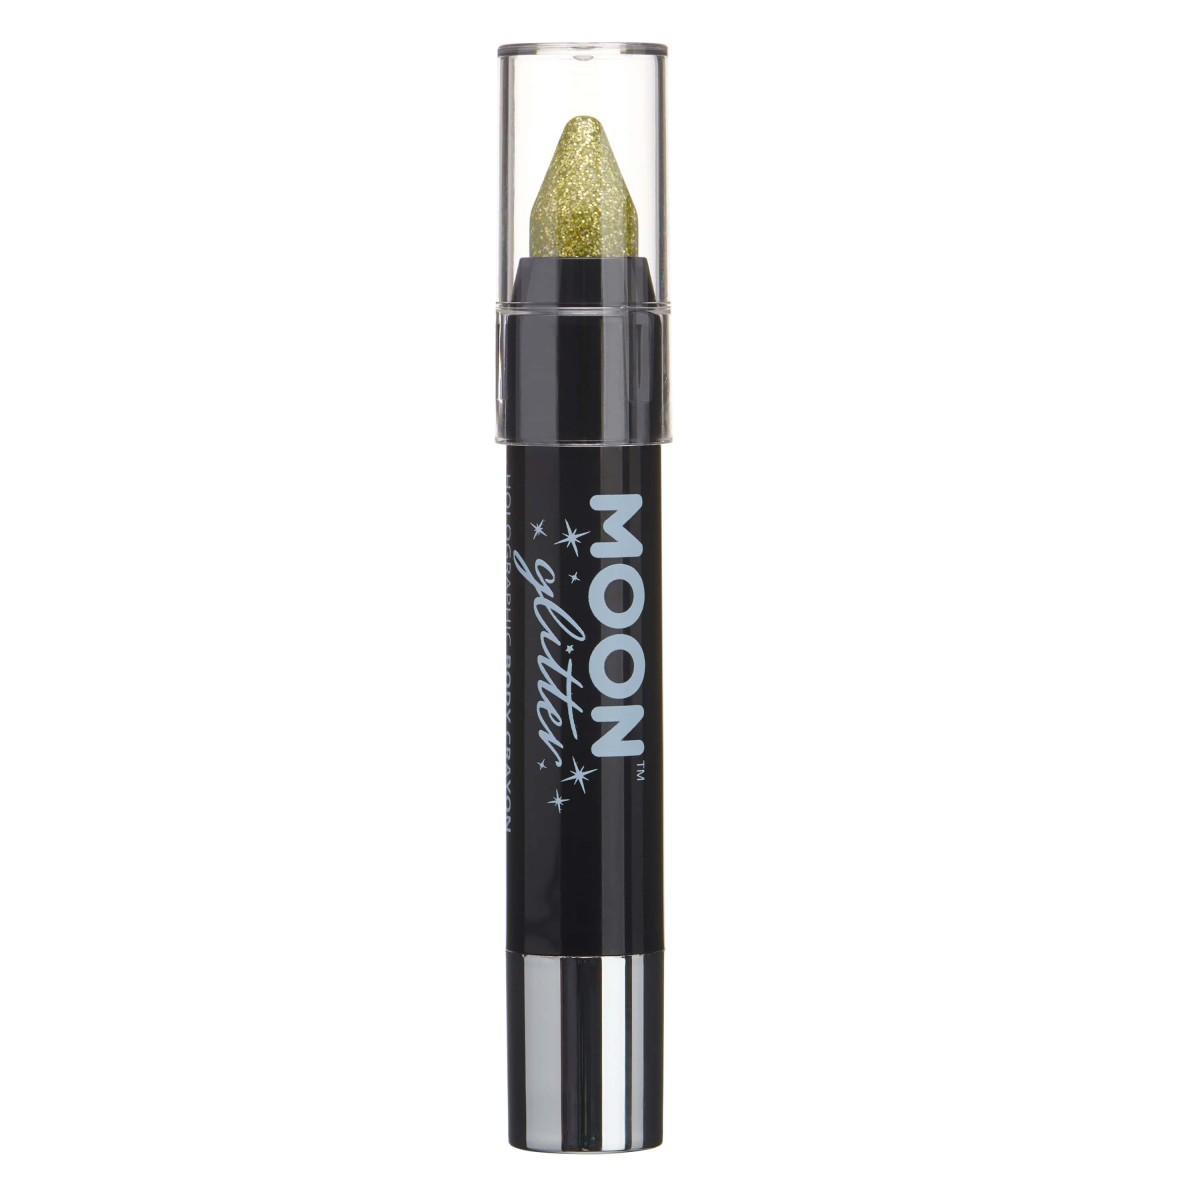 MOON CREATIONS G2 HOLOGRAPHIC GLITTER FACE & BODY CRAYON GOLD 3.2g